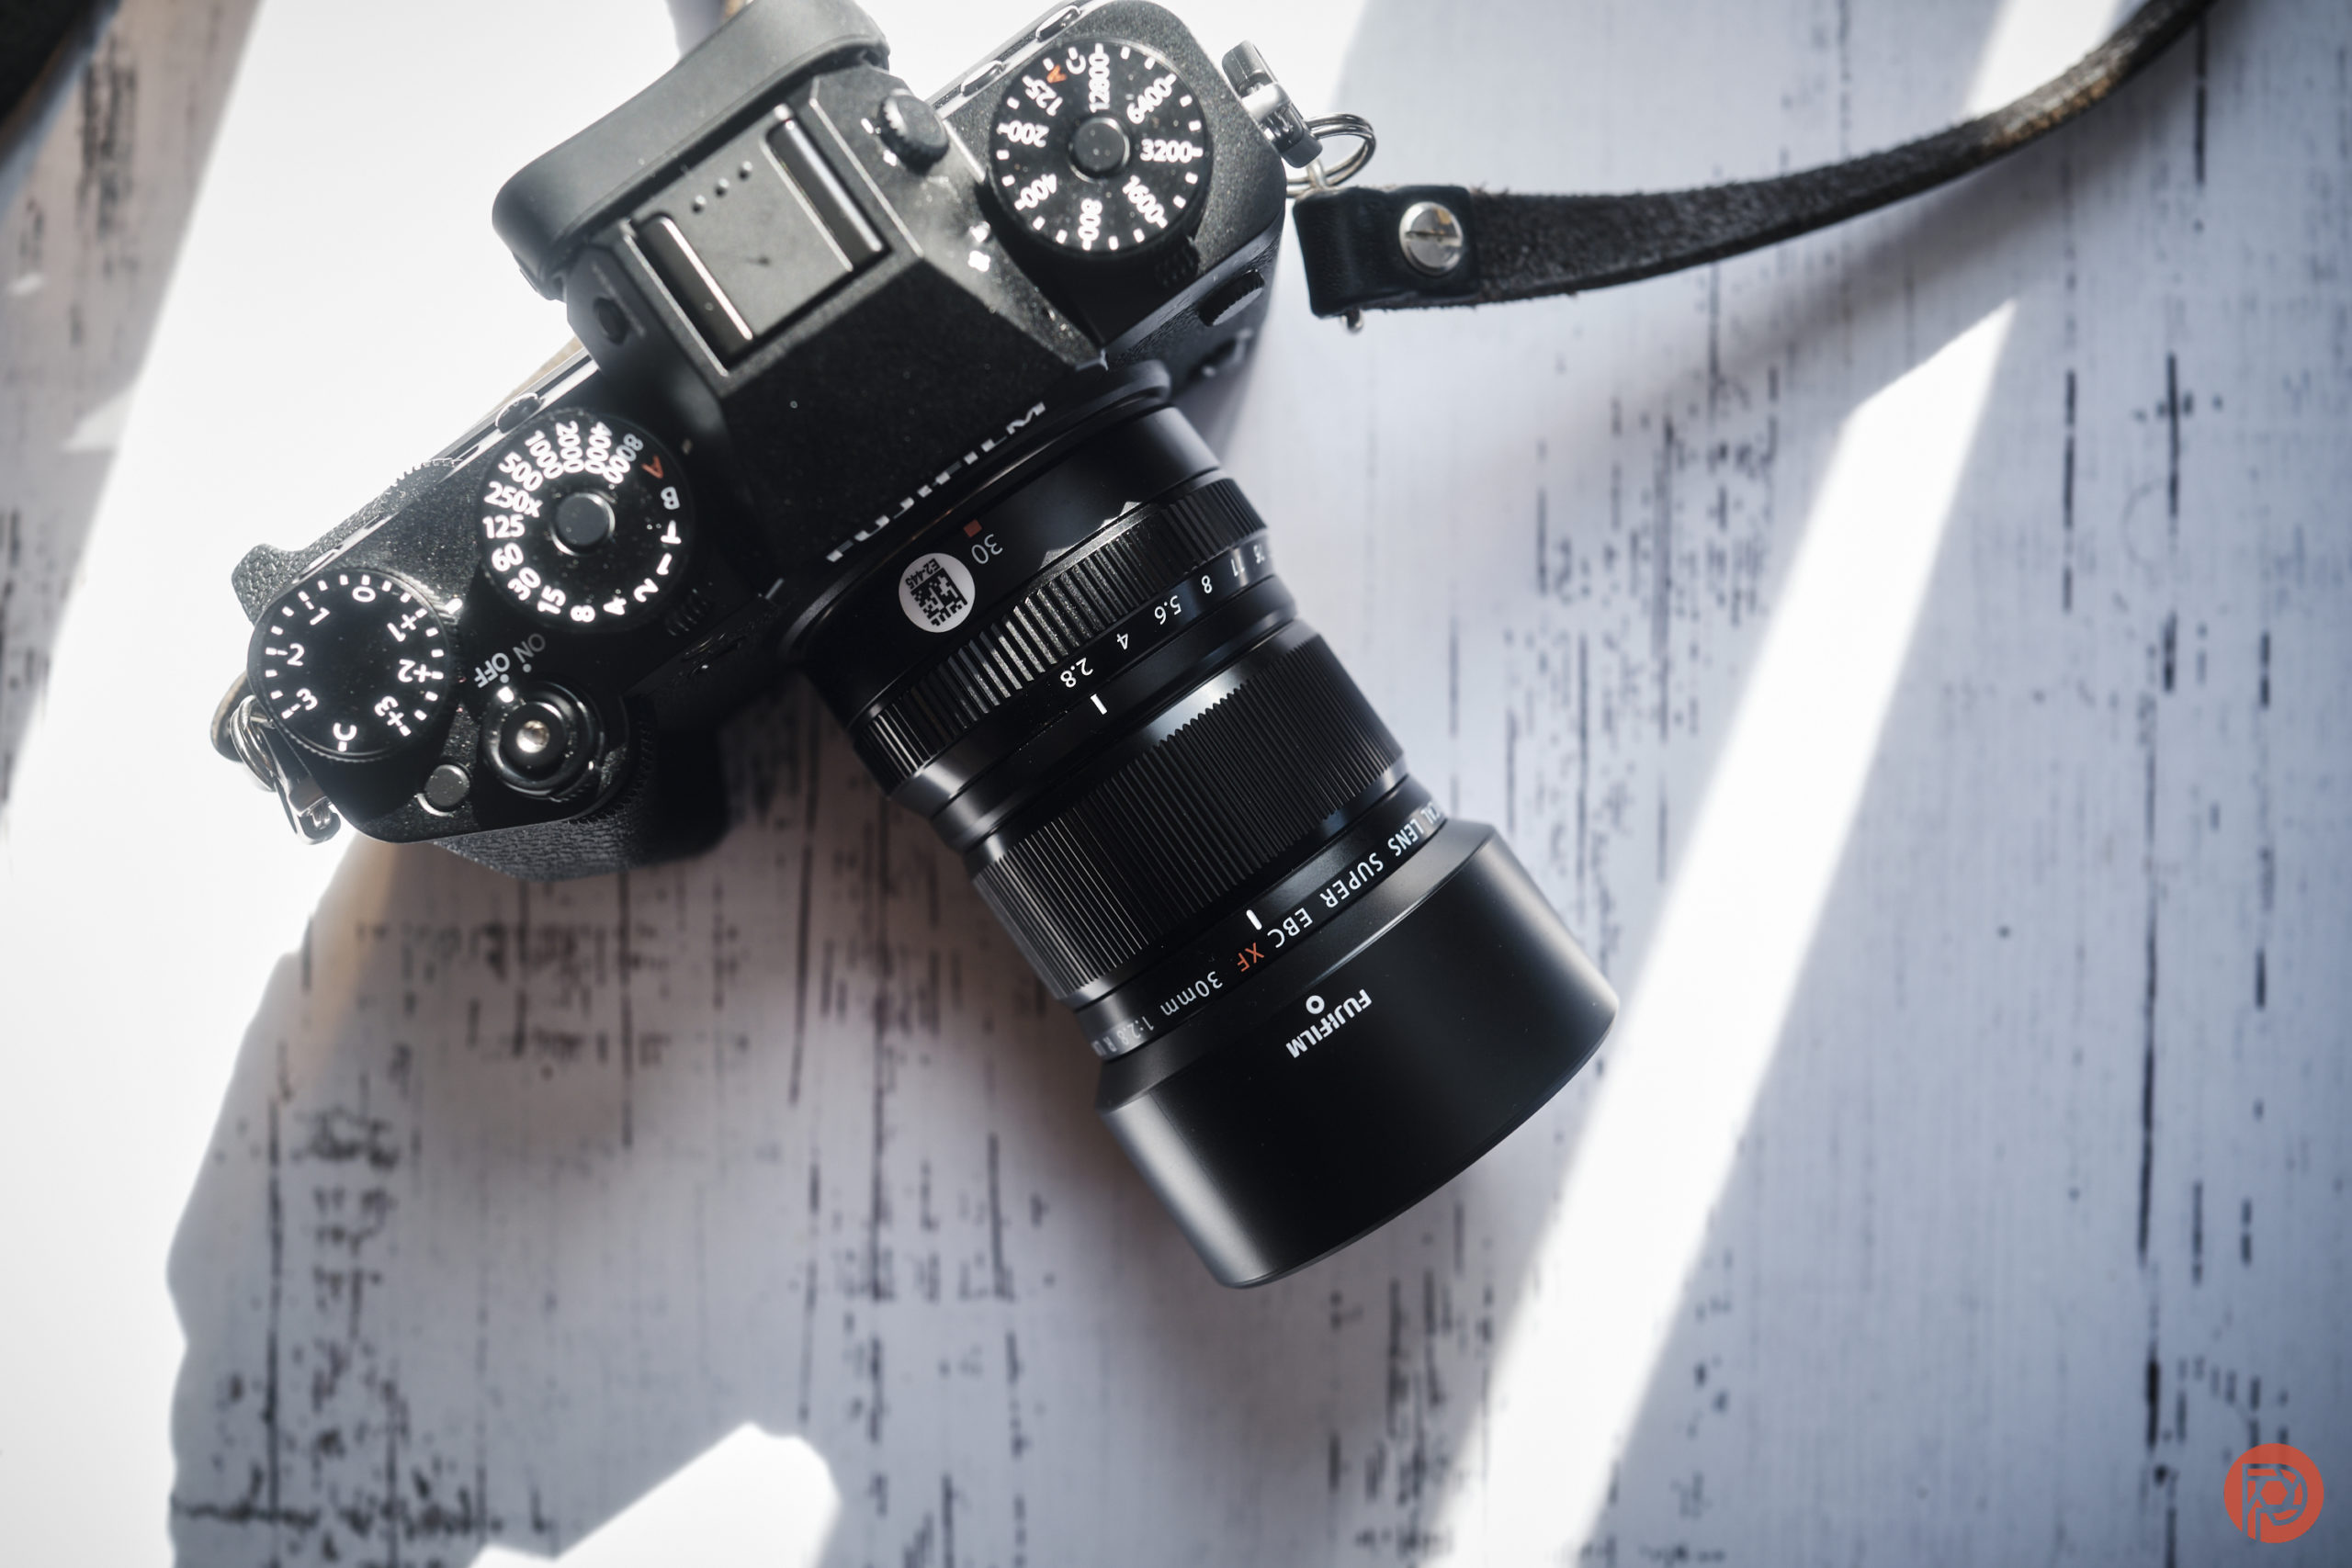 Hands-On Review: New FUJIFILM X-T5 and XF 30mm Macro Lens